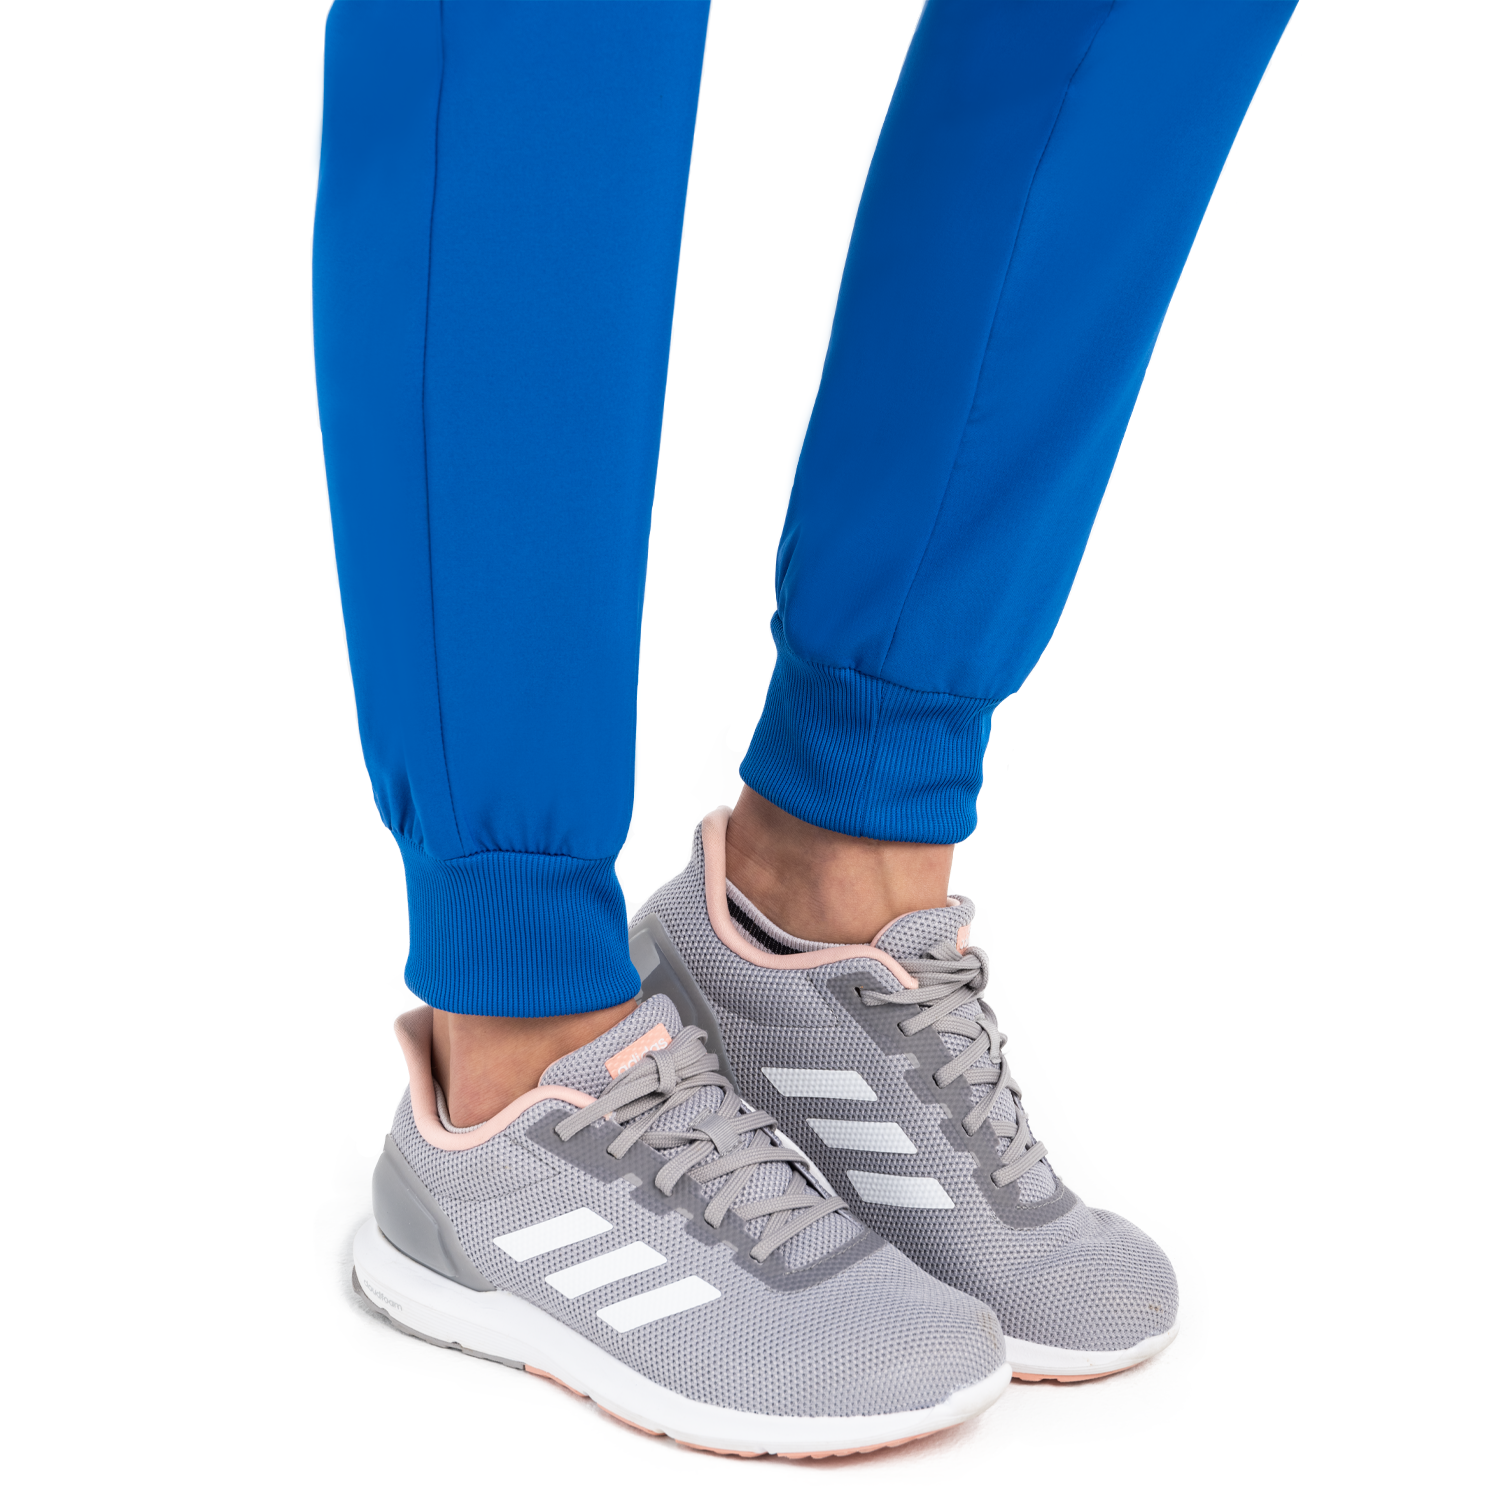 LIMITED EDITION LIFETHREADS WOMEN’S ACTIVE JOGGER PANT